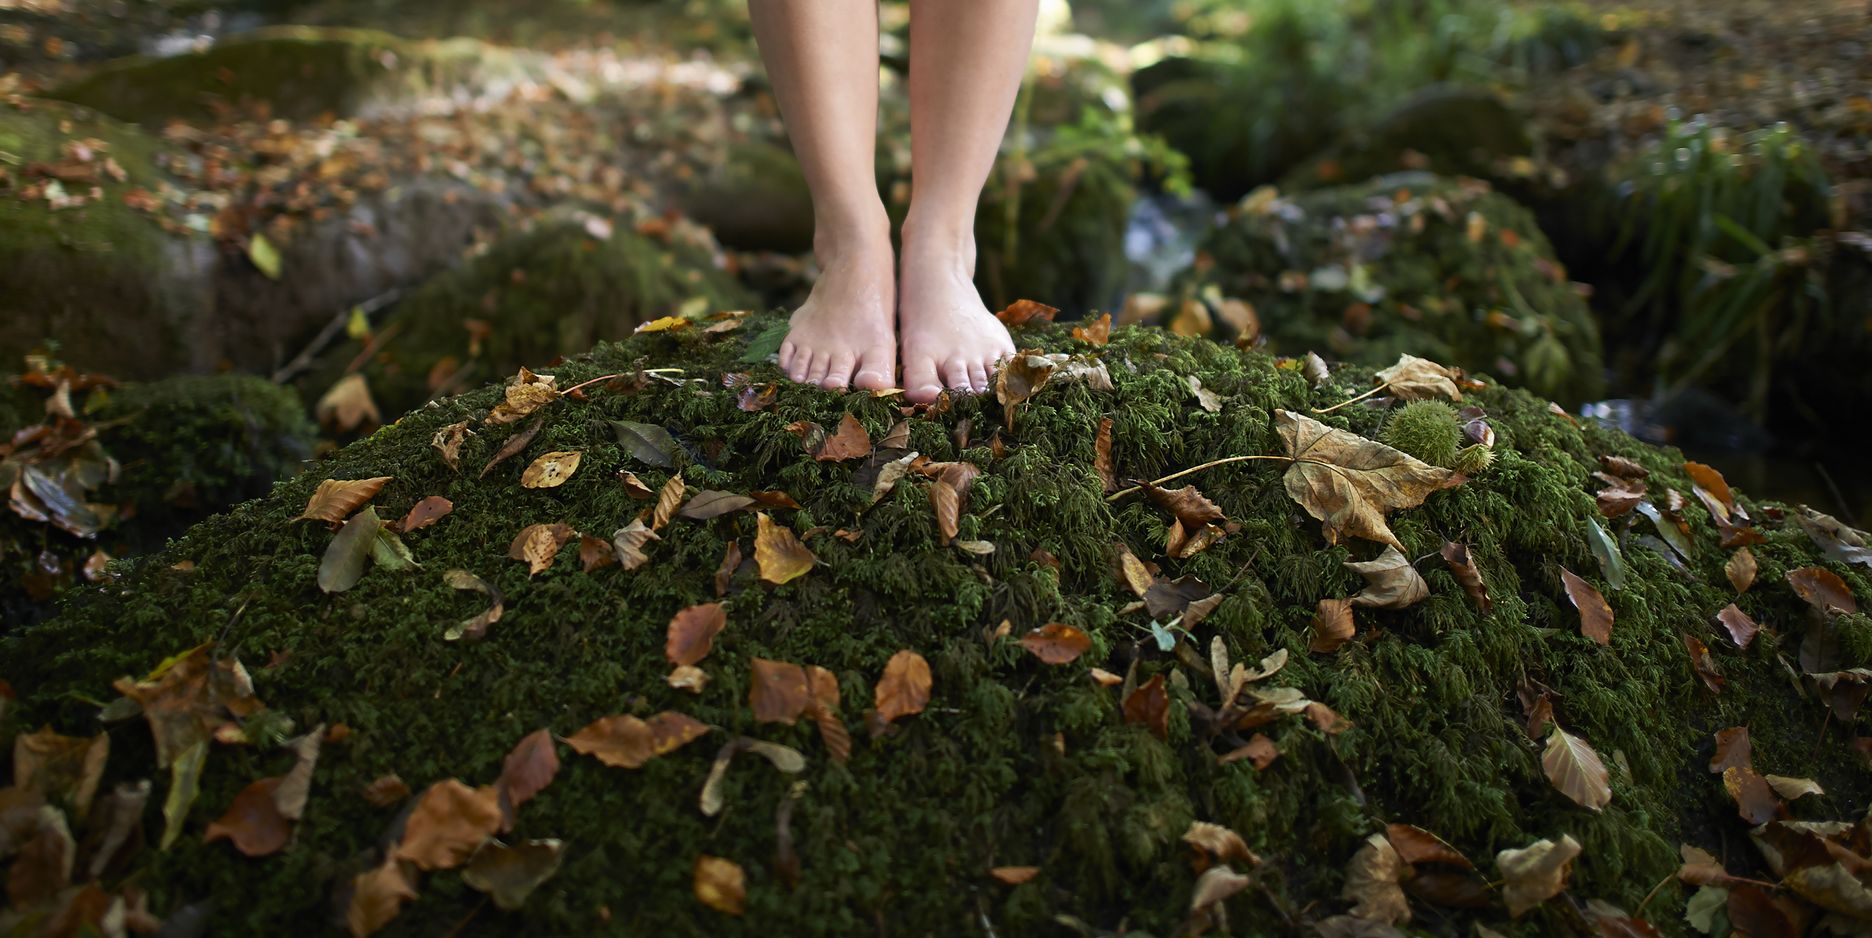 feet on moss covered rock in autumn woodland